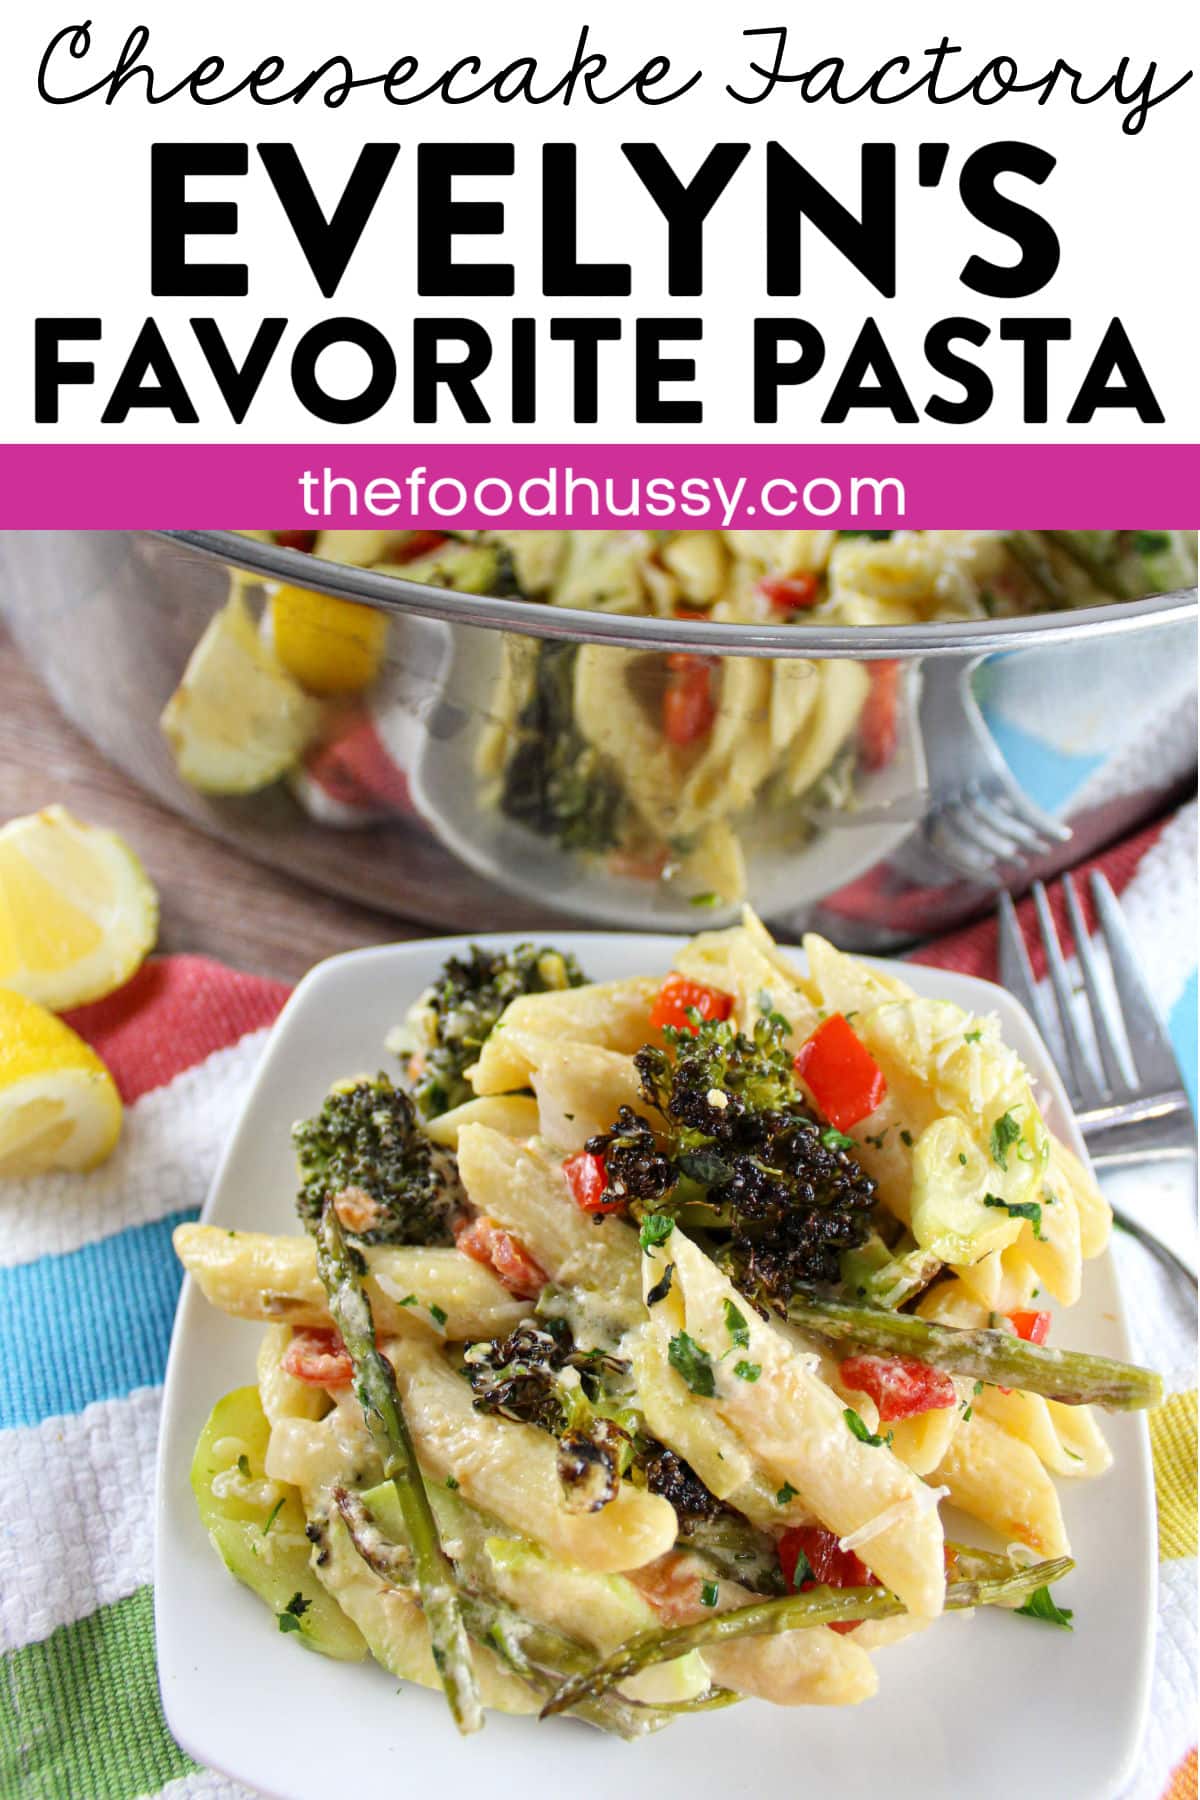 Cheesecake Factory's Evelyn's Favorite Pasta is a menu classic! But - it's recently been updated! I guess Evelyn likes something new! This Favorite is penne pasta LOADED with veggies and dressed in a light cheese sauce.  via @foodhussy